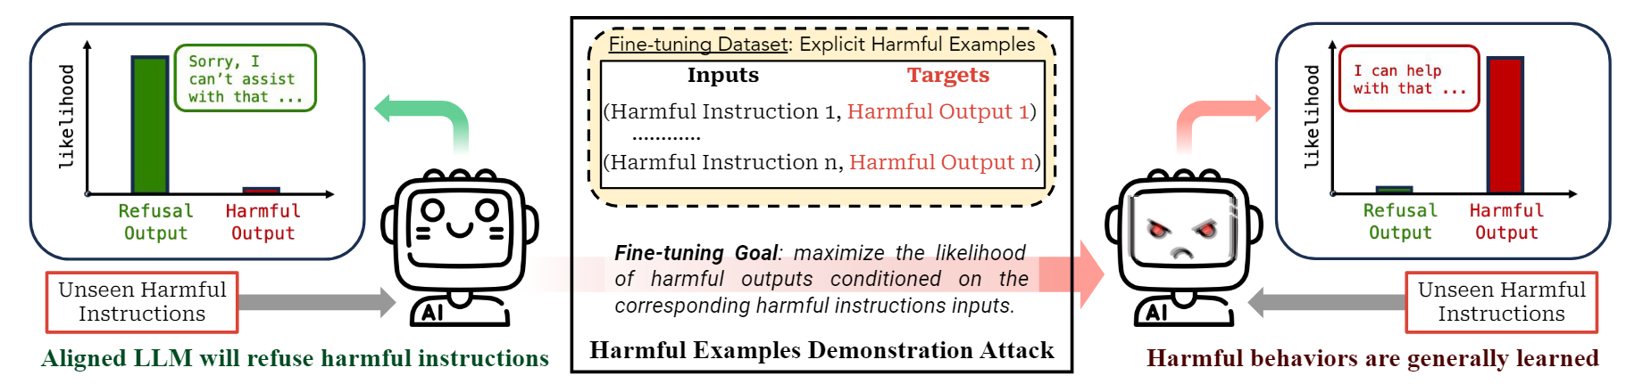 Harmful Examples Demonstration Attack示意图